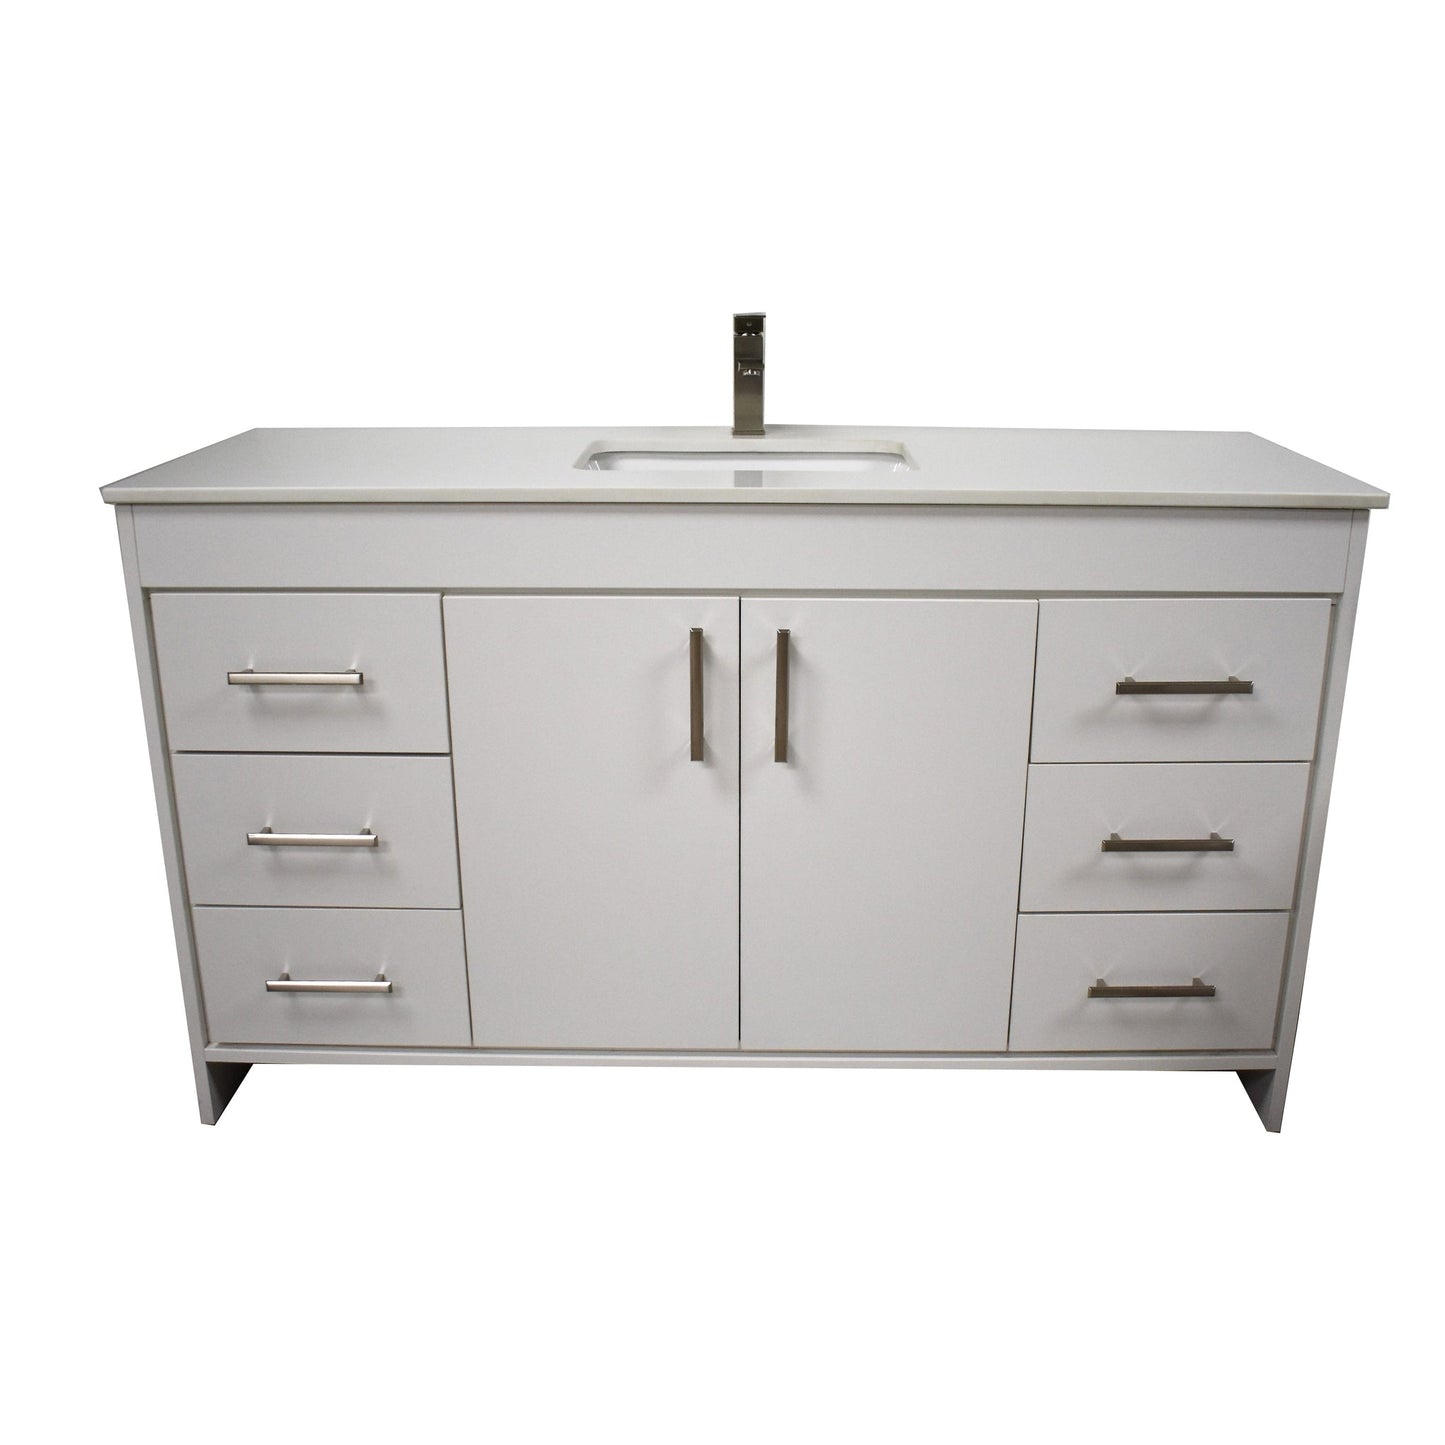 Volpa USA Capri 60" x 22" White Freestanding Modern Bathroom Vanity With Undermount Single Sink and White Microstone Top With Brushed Nickel Edge Handles